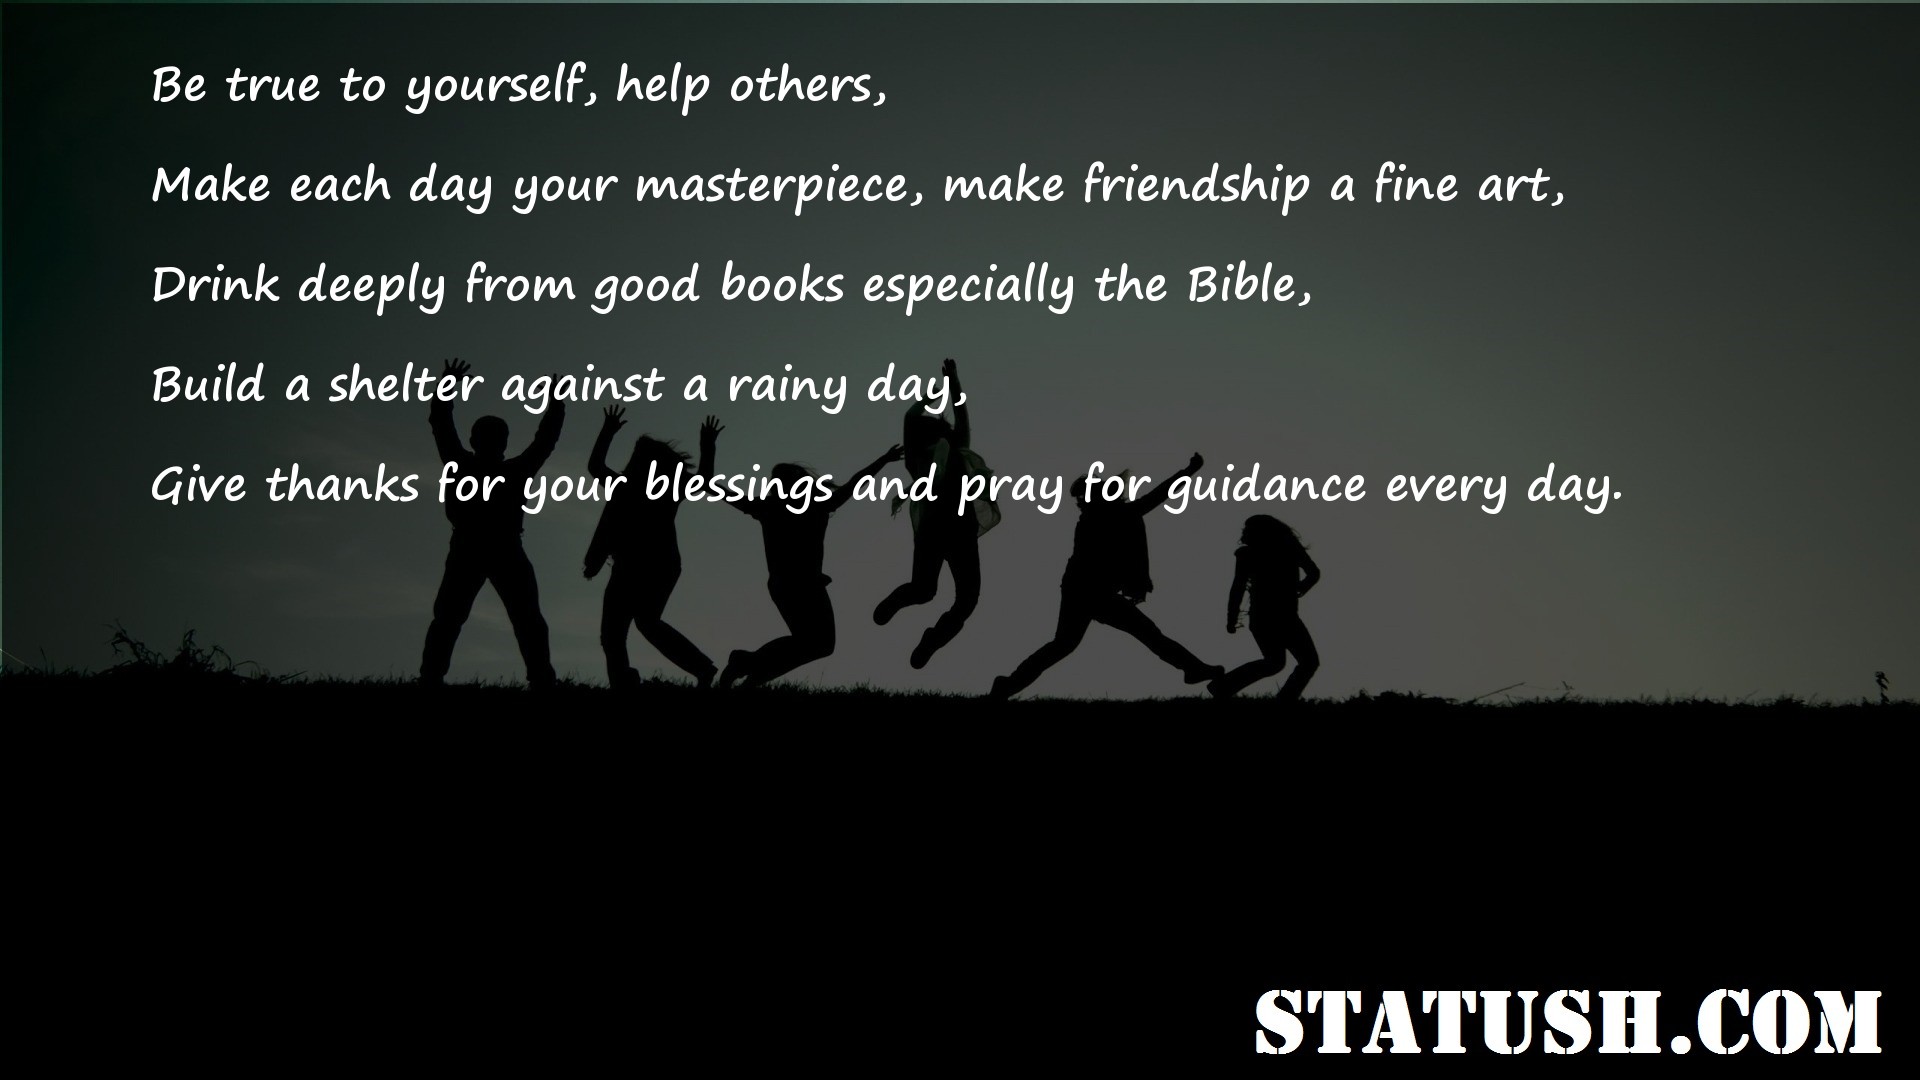 Be true to yourself help others Friendship Quotes at statush.com